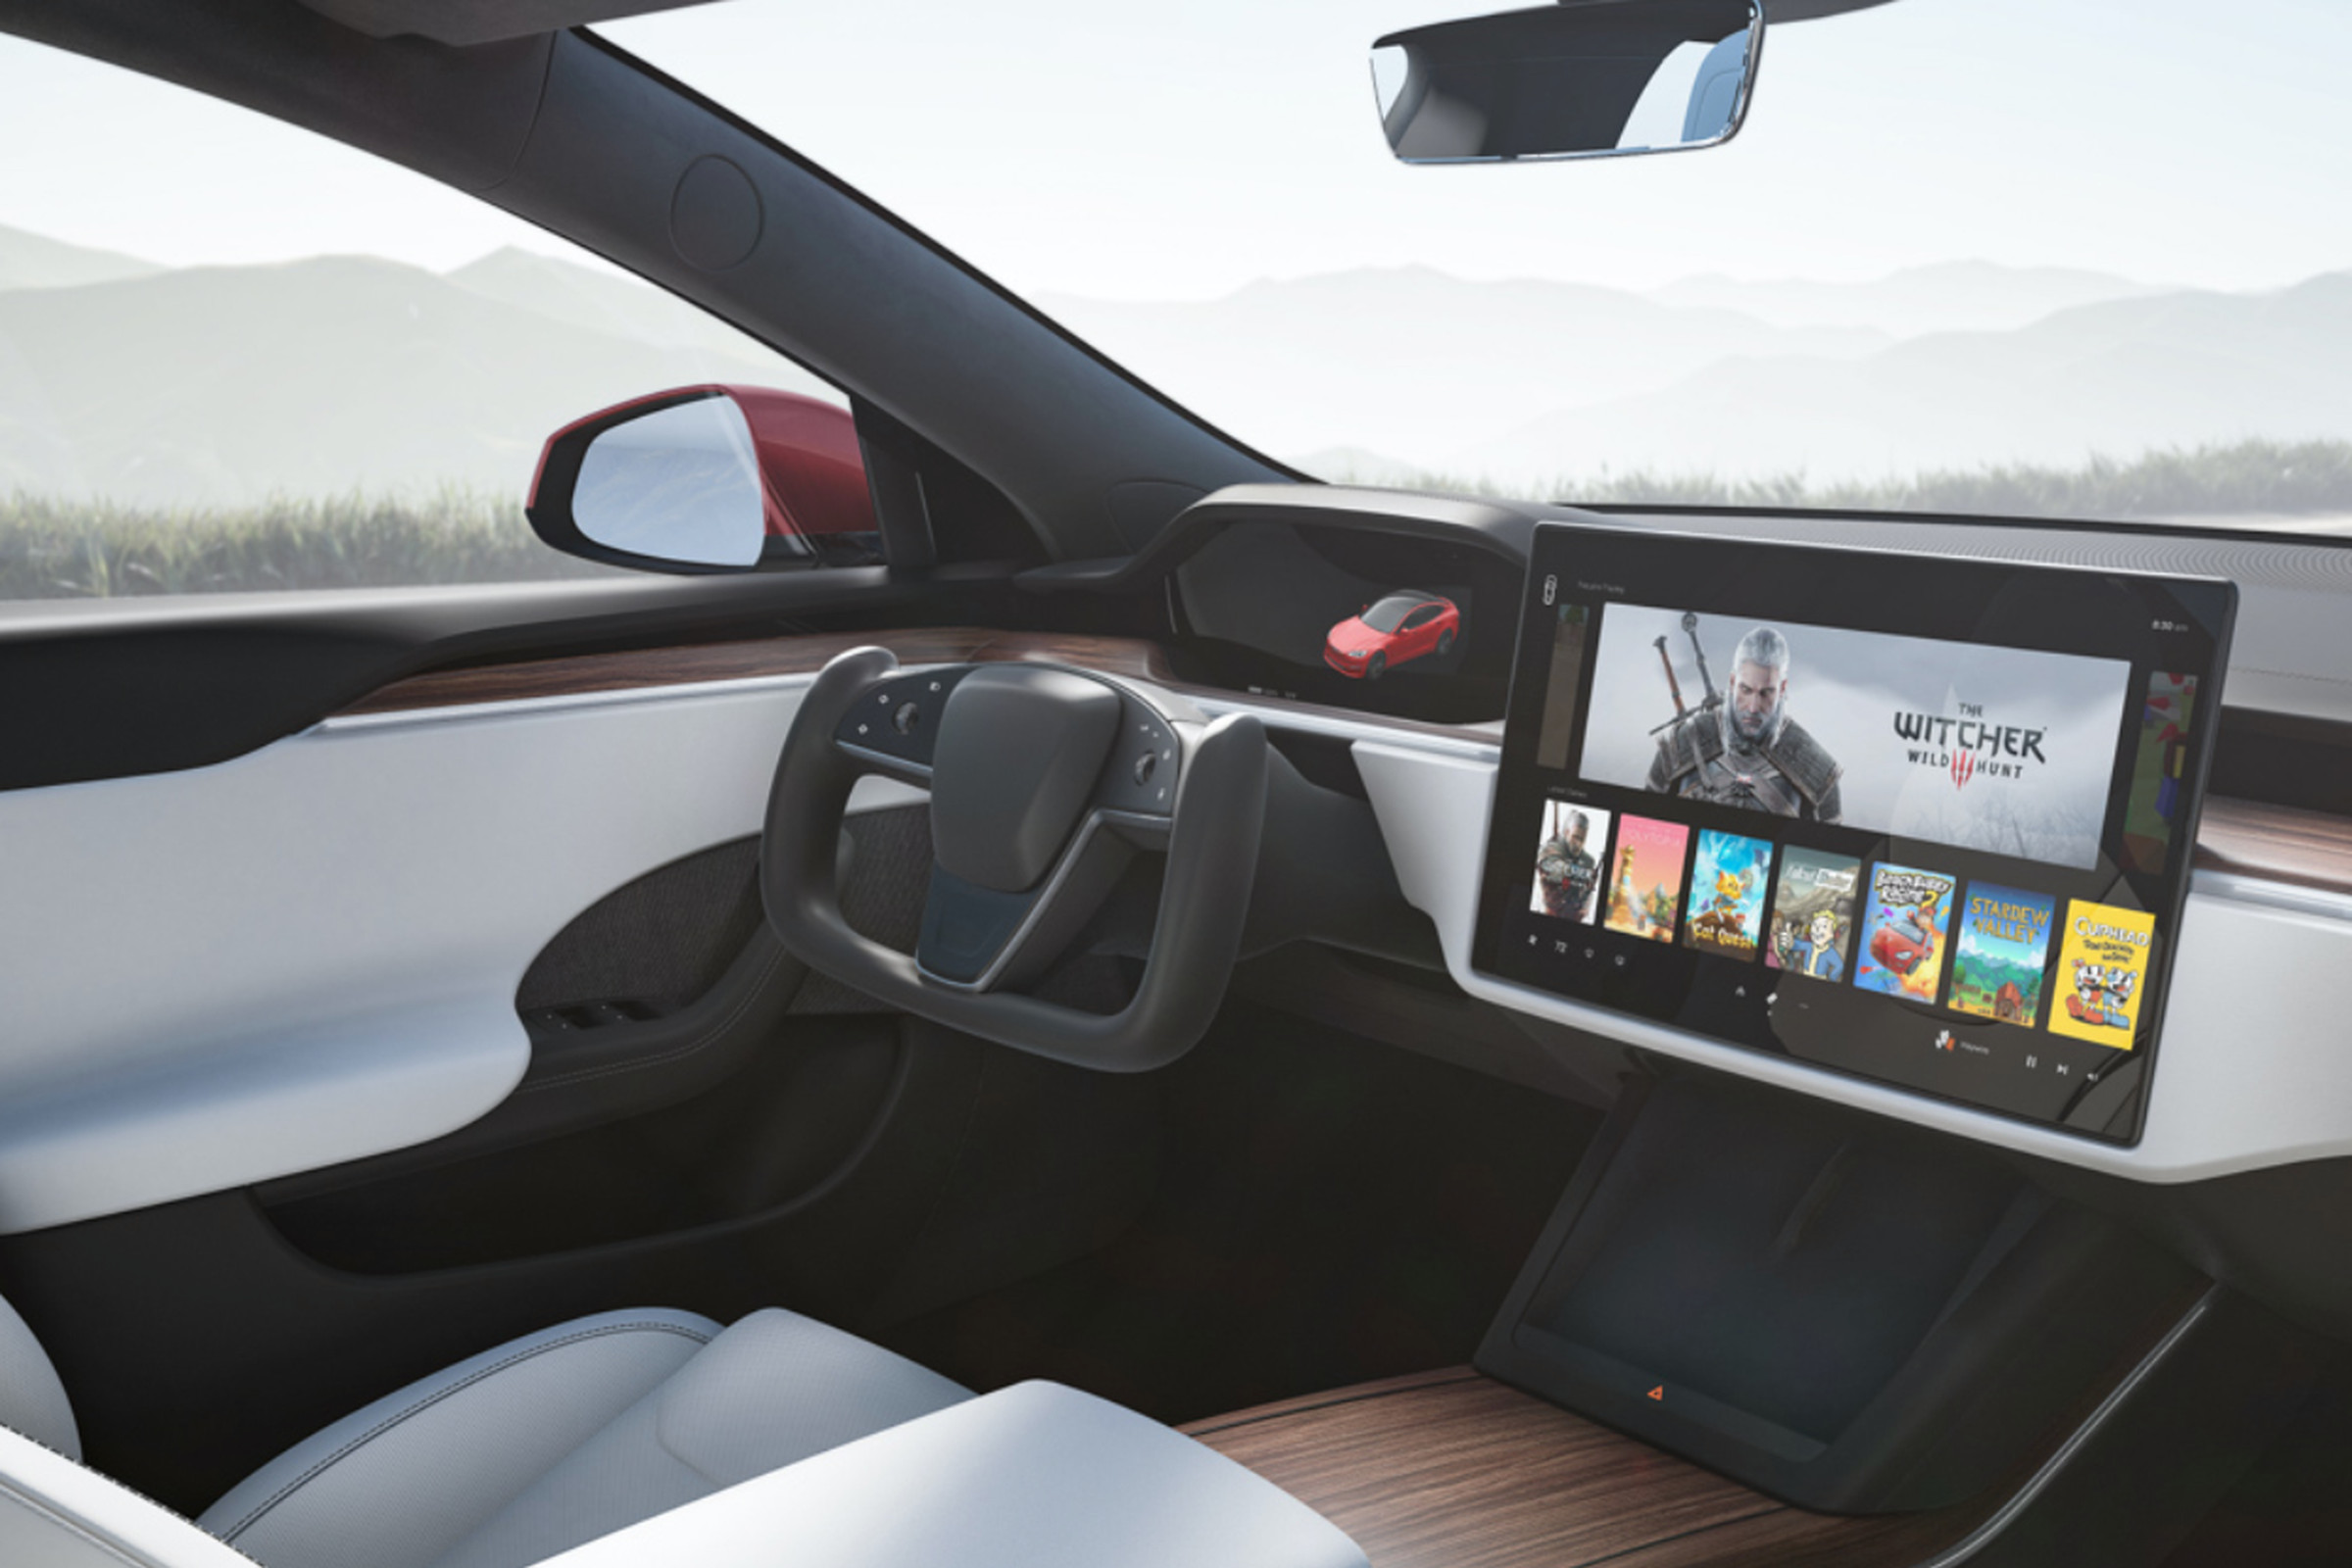 The refreshed Model S interior and large center display.